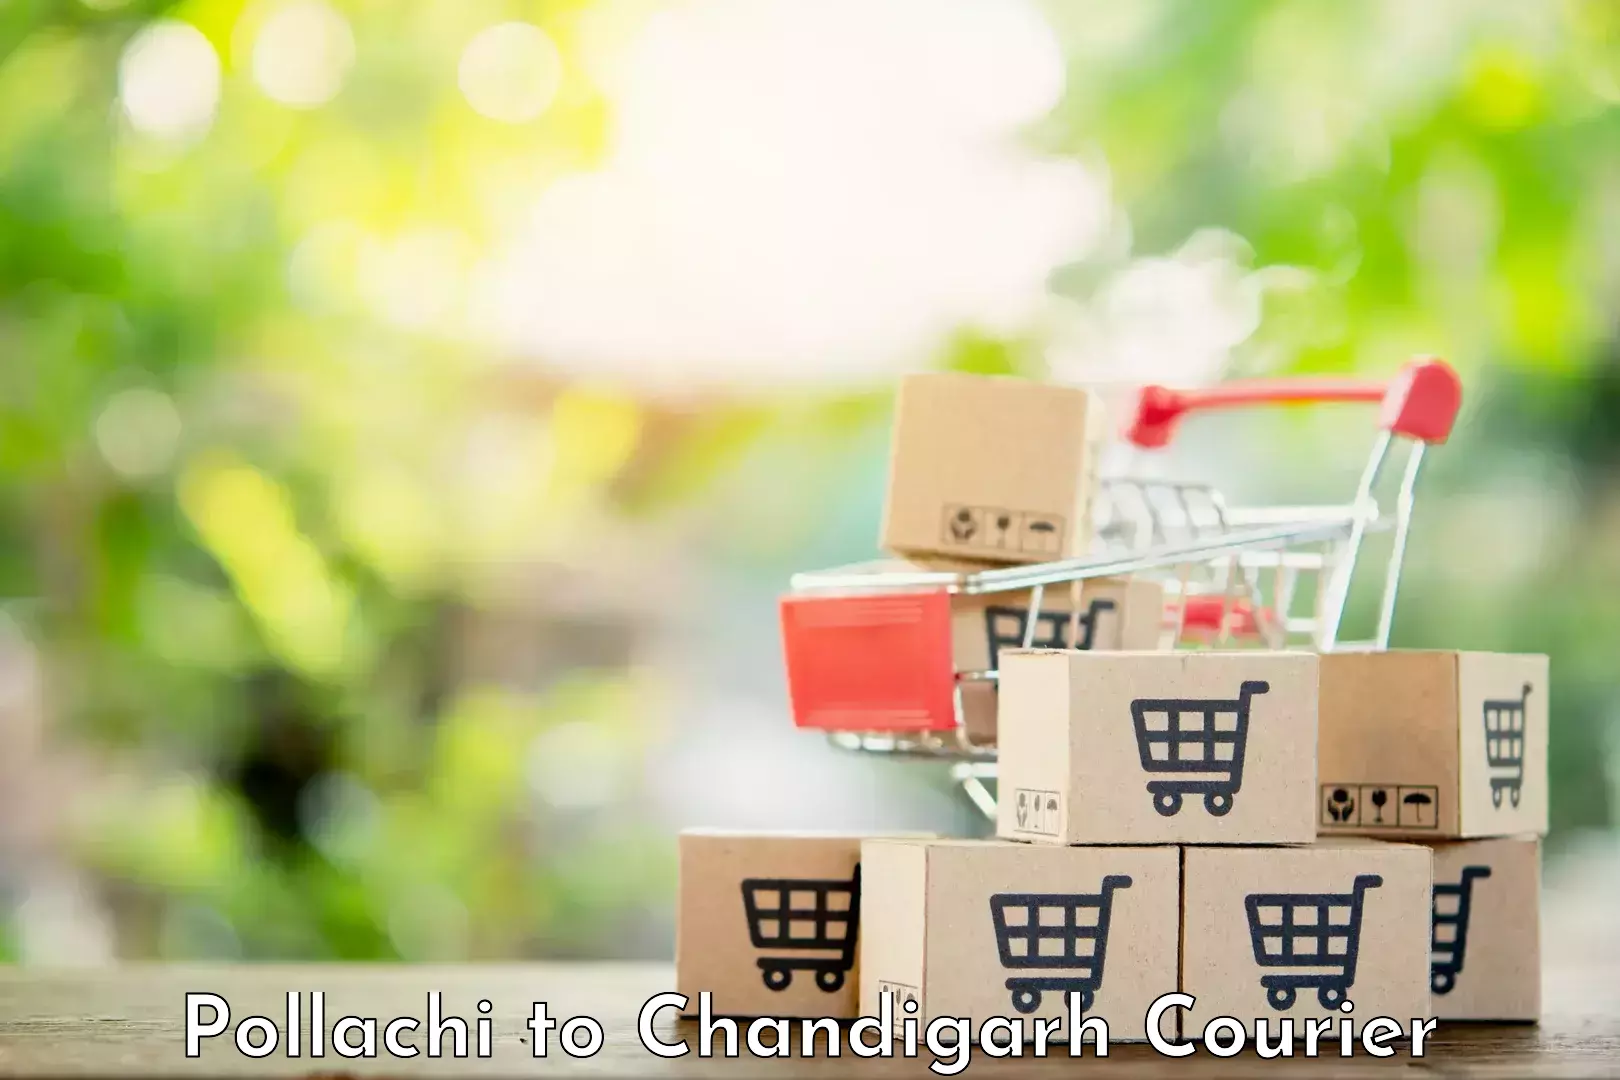 Advanced delivery network Pollachi to Chandigarh